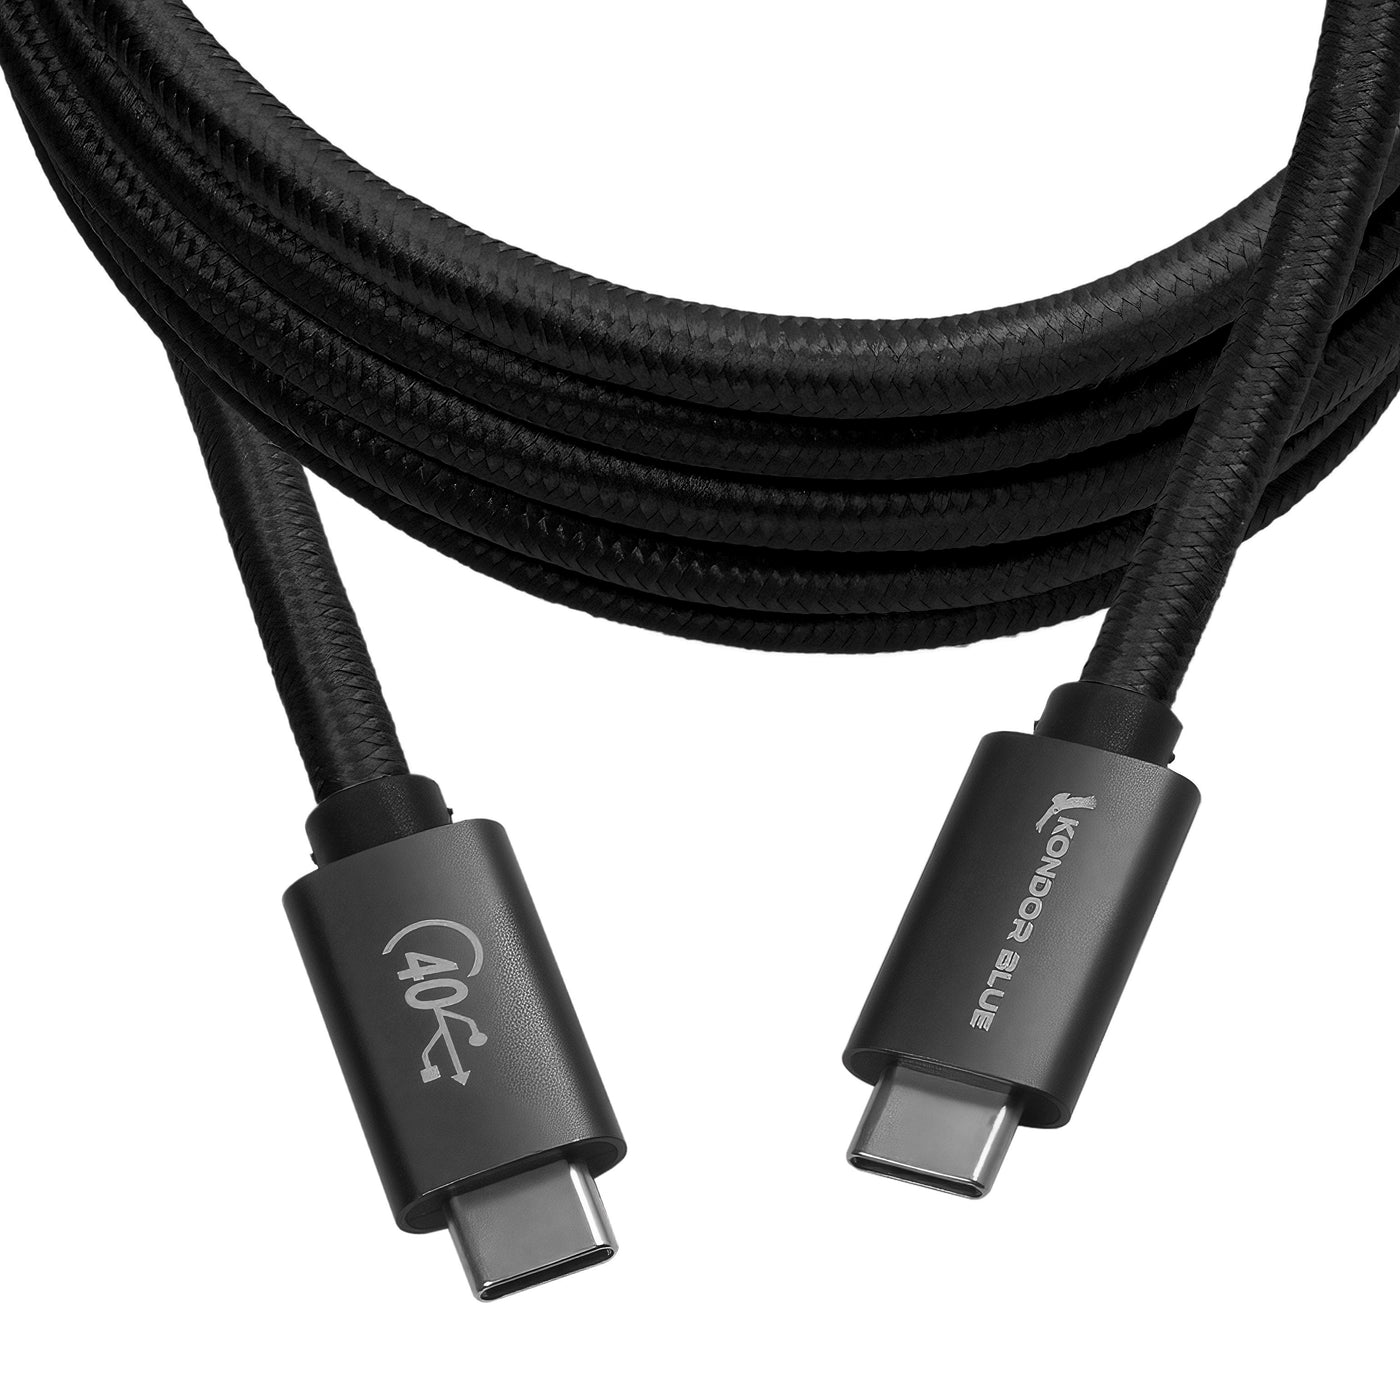 Cable USB tipo C, negro